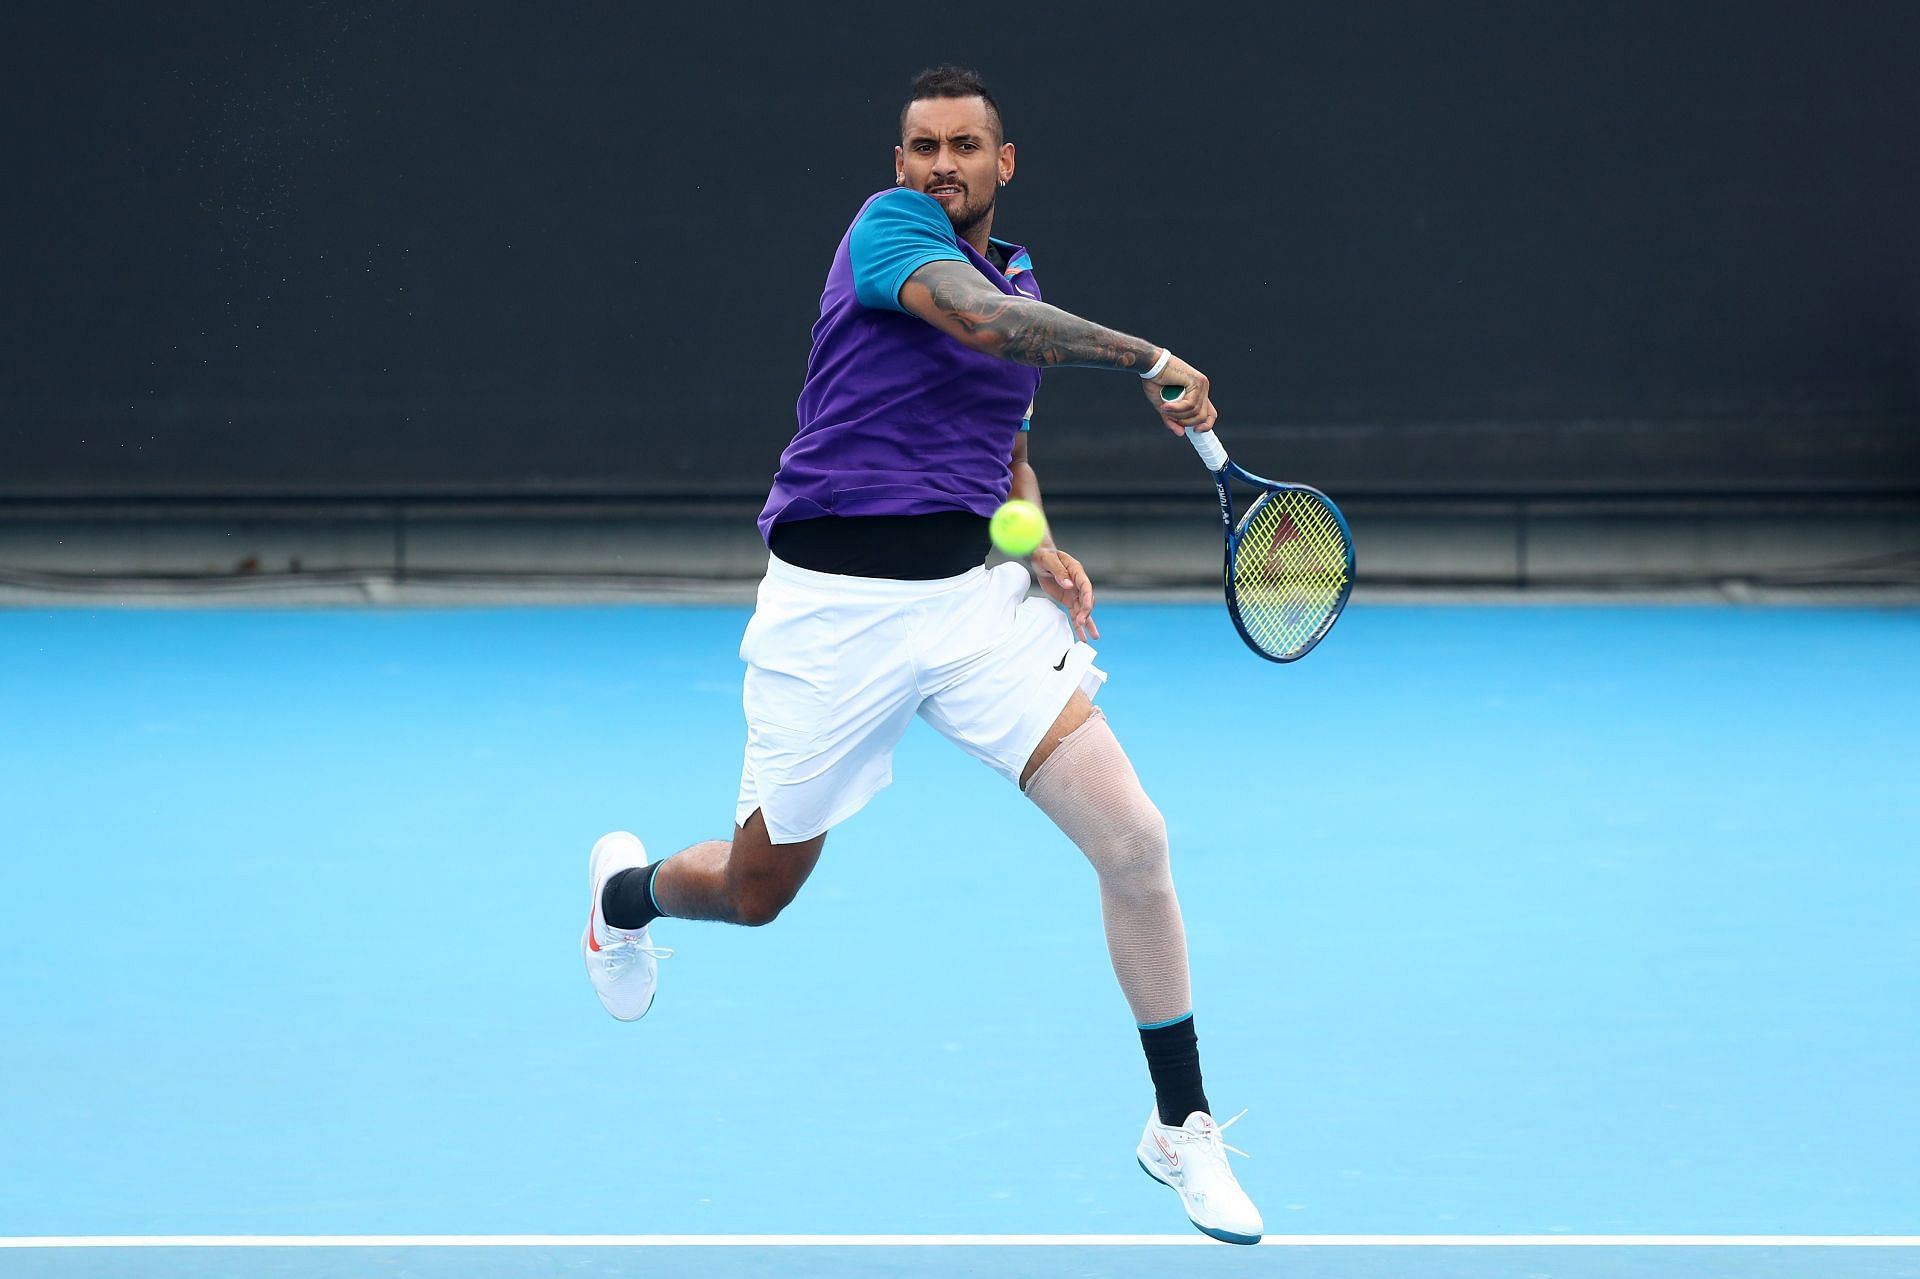 Nick Kyrgios has a losing H2H record against Coric